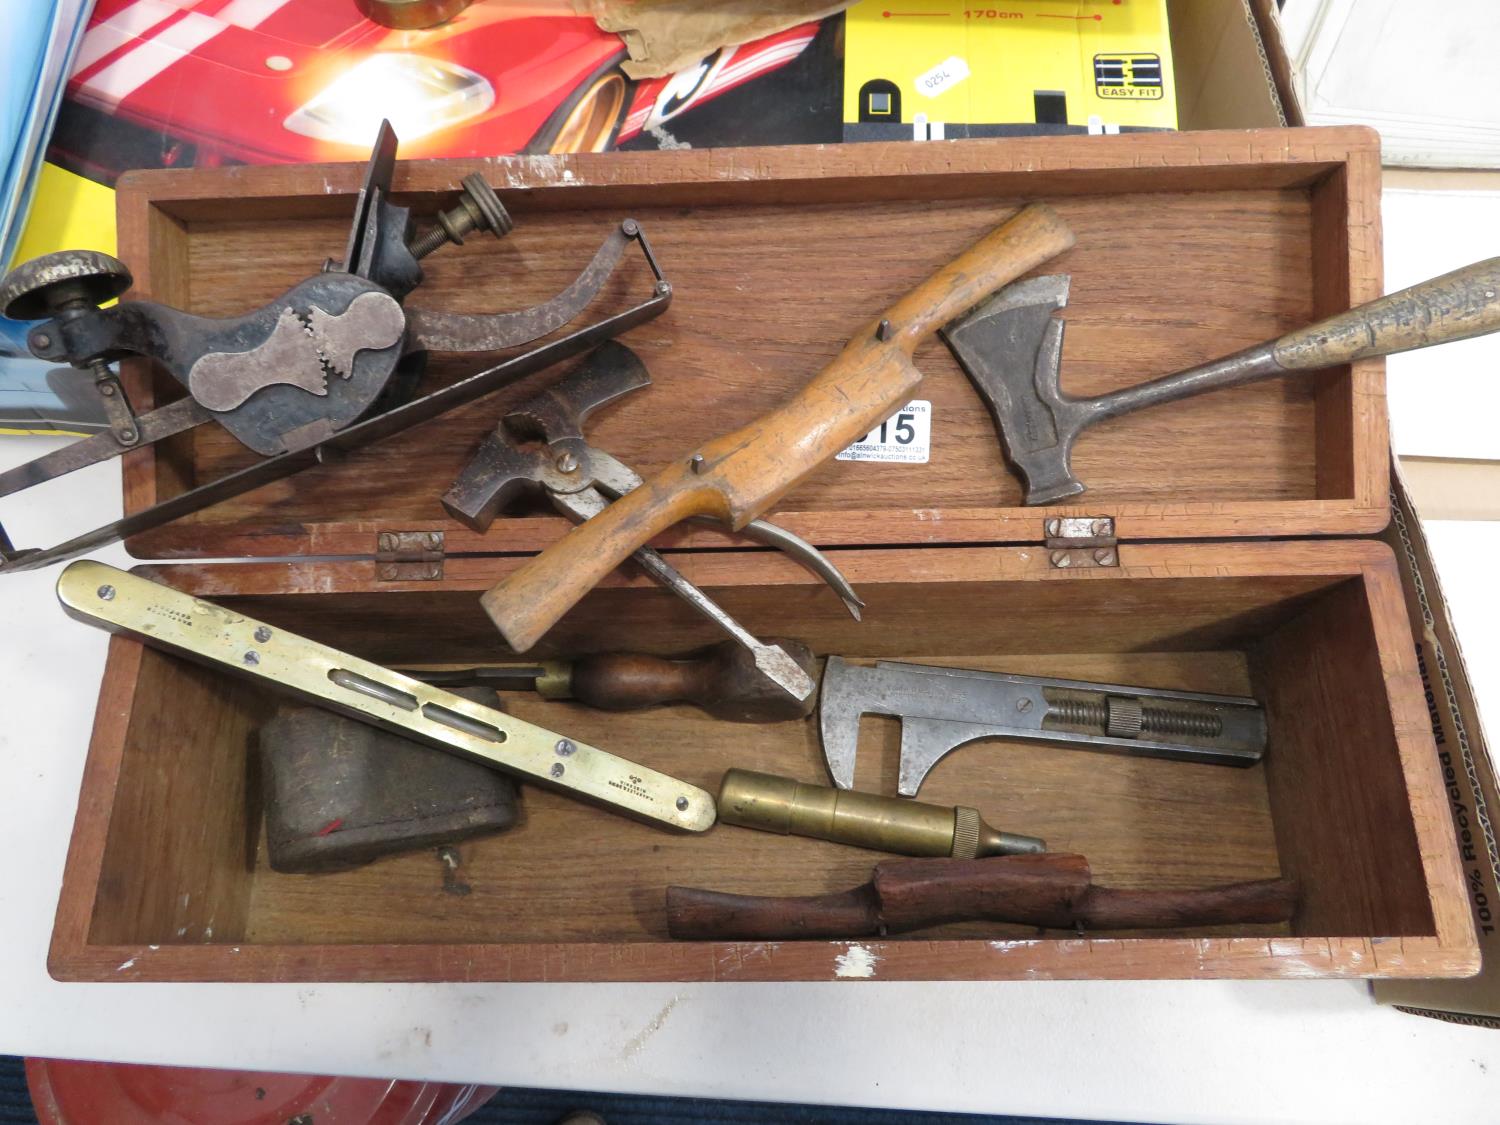 Stanley 113 plane, some brass and ebony spirit levels and other tools in solid wooden box